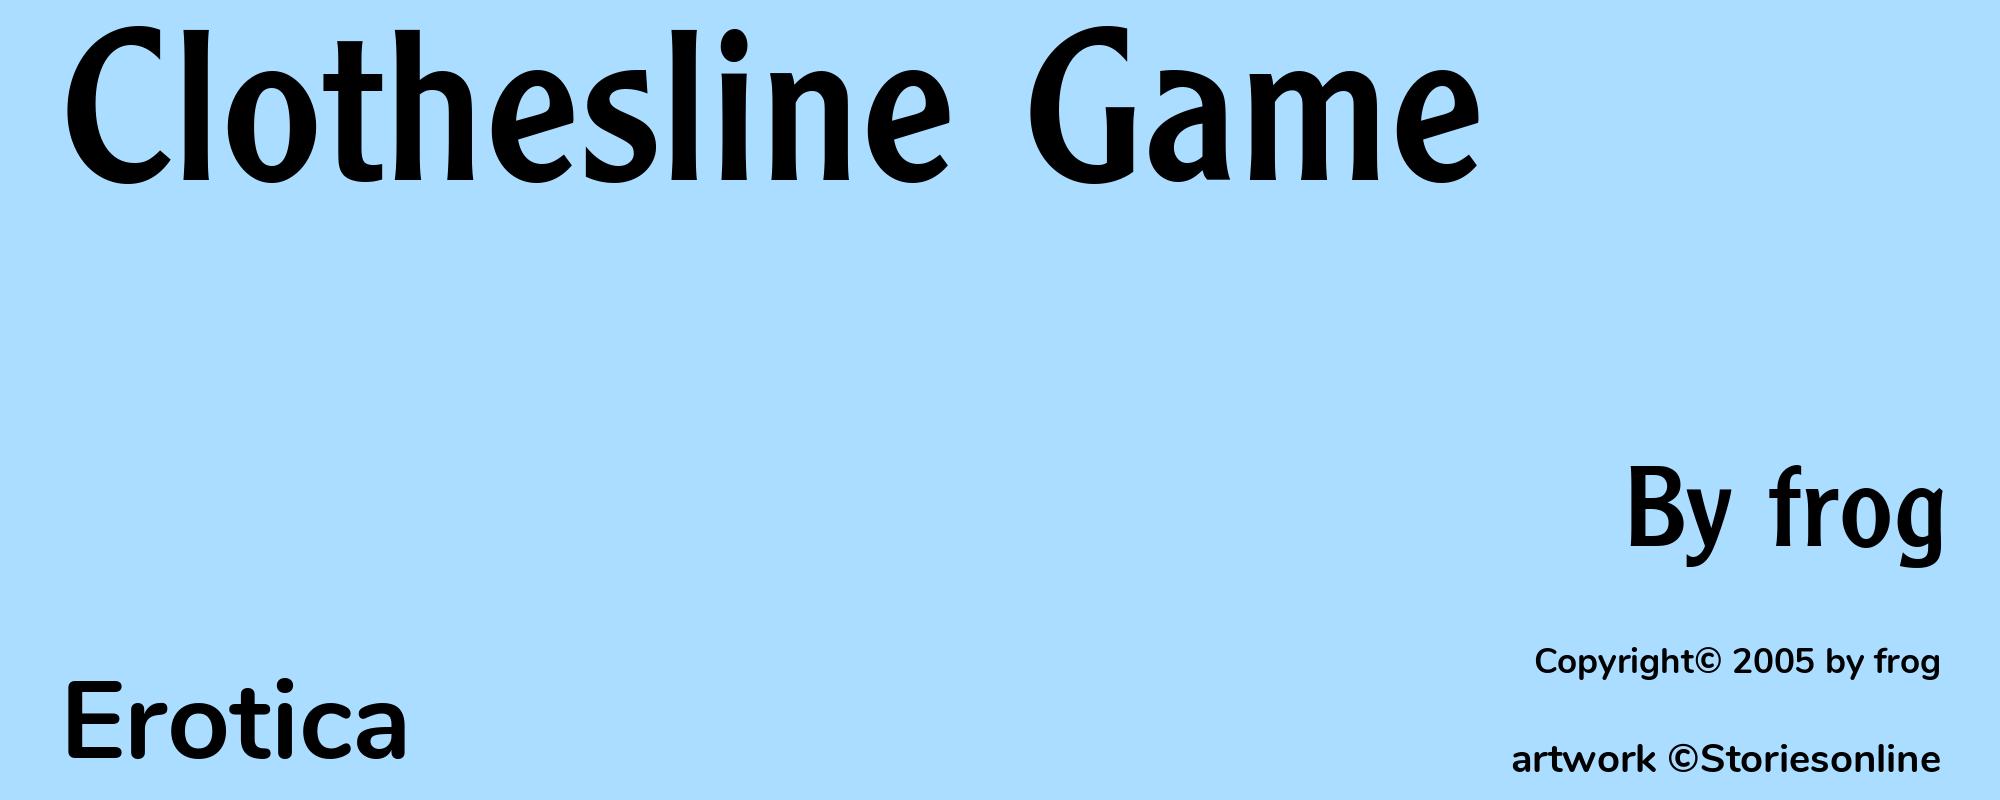 Clothesline Game - Cover